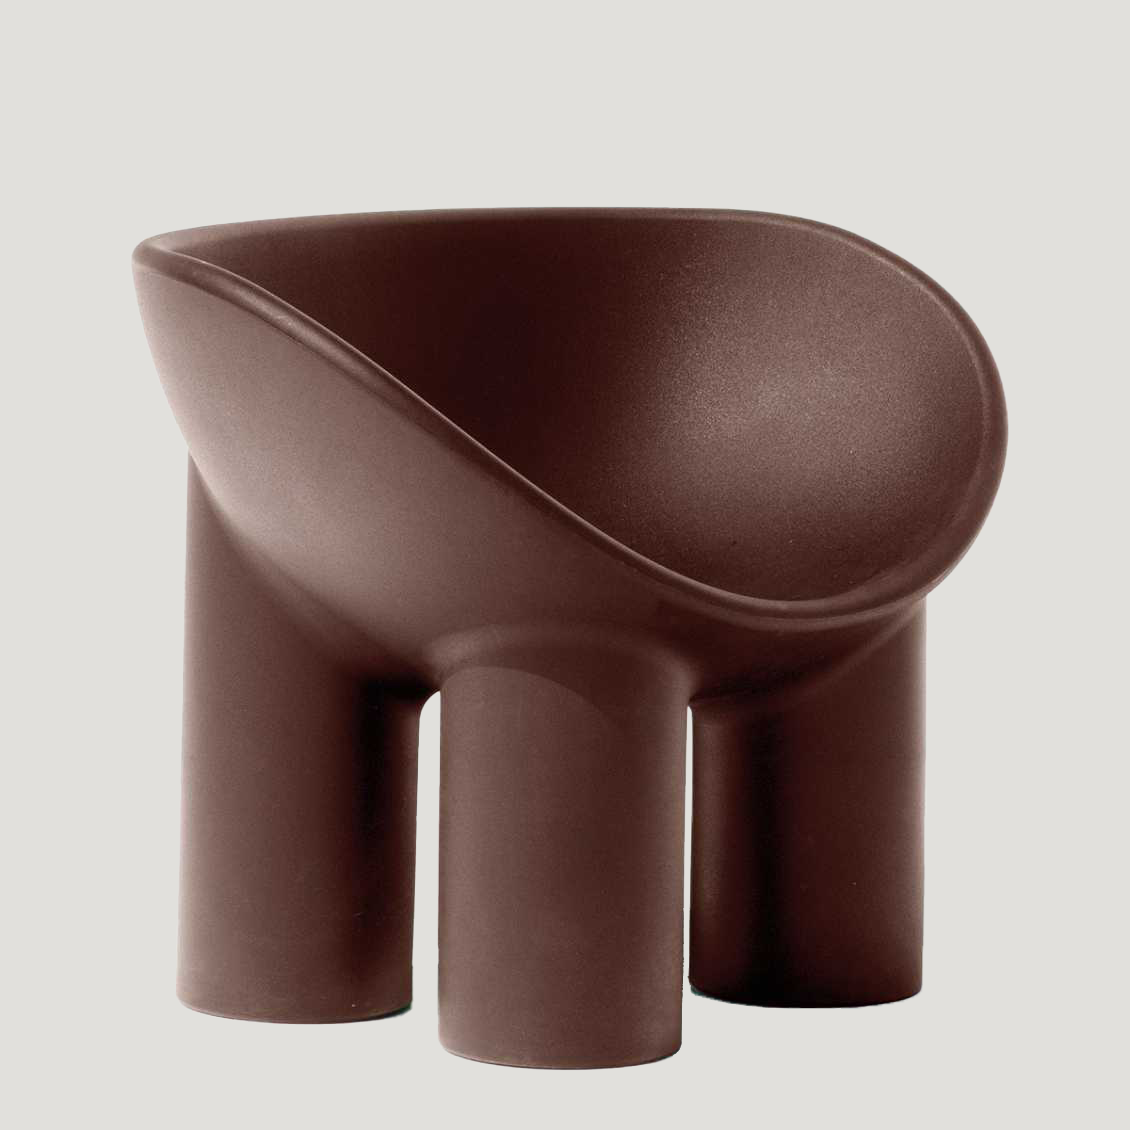 Roly Poly Chair Peat